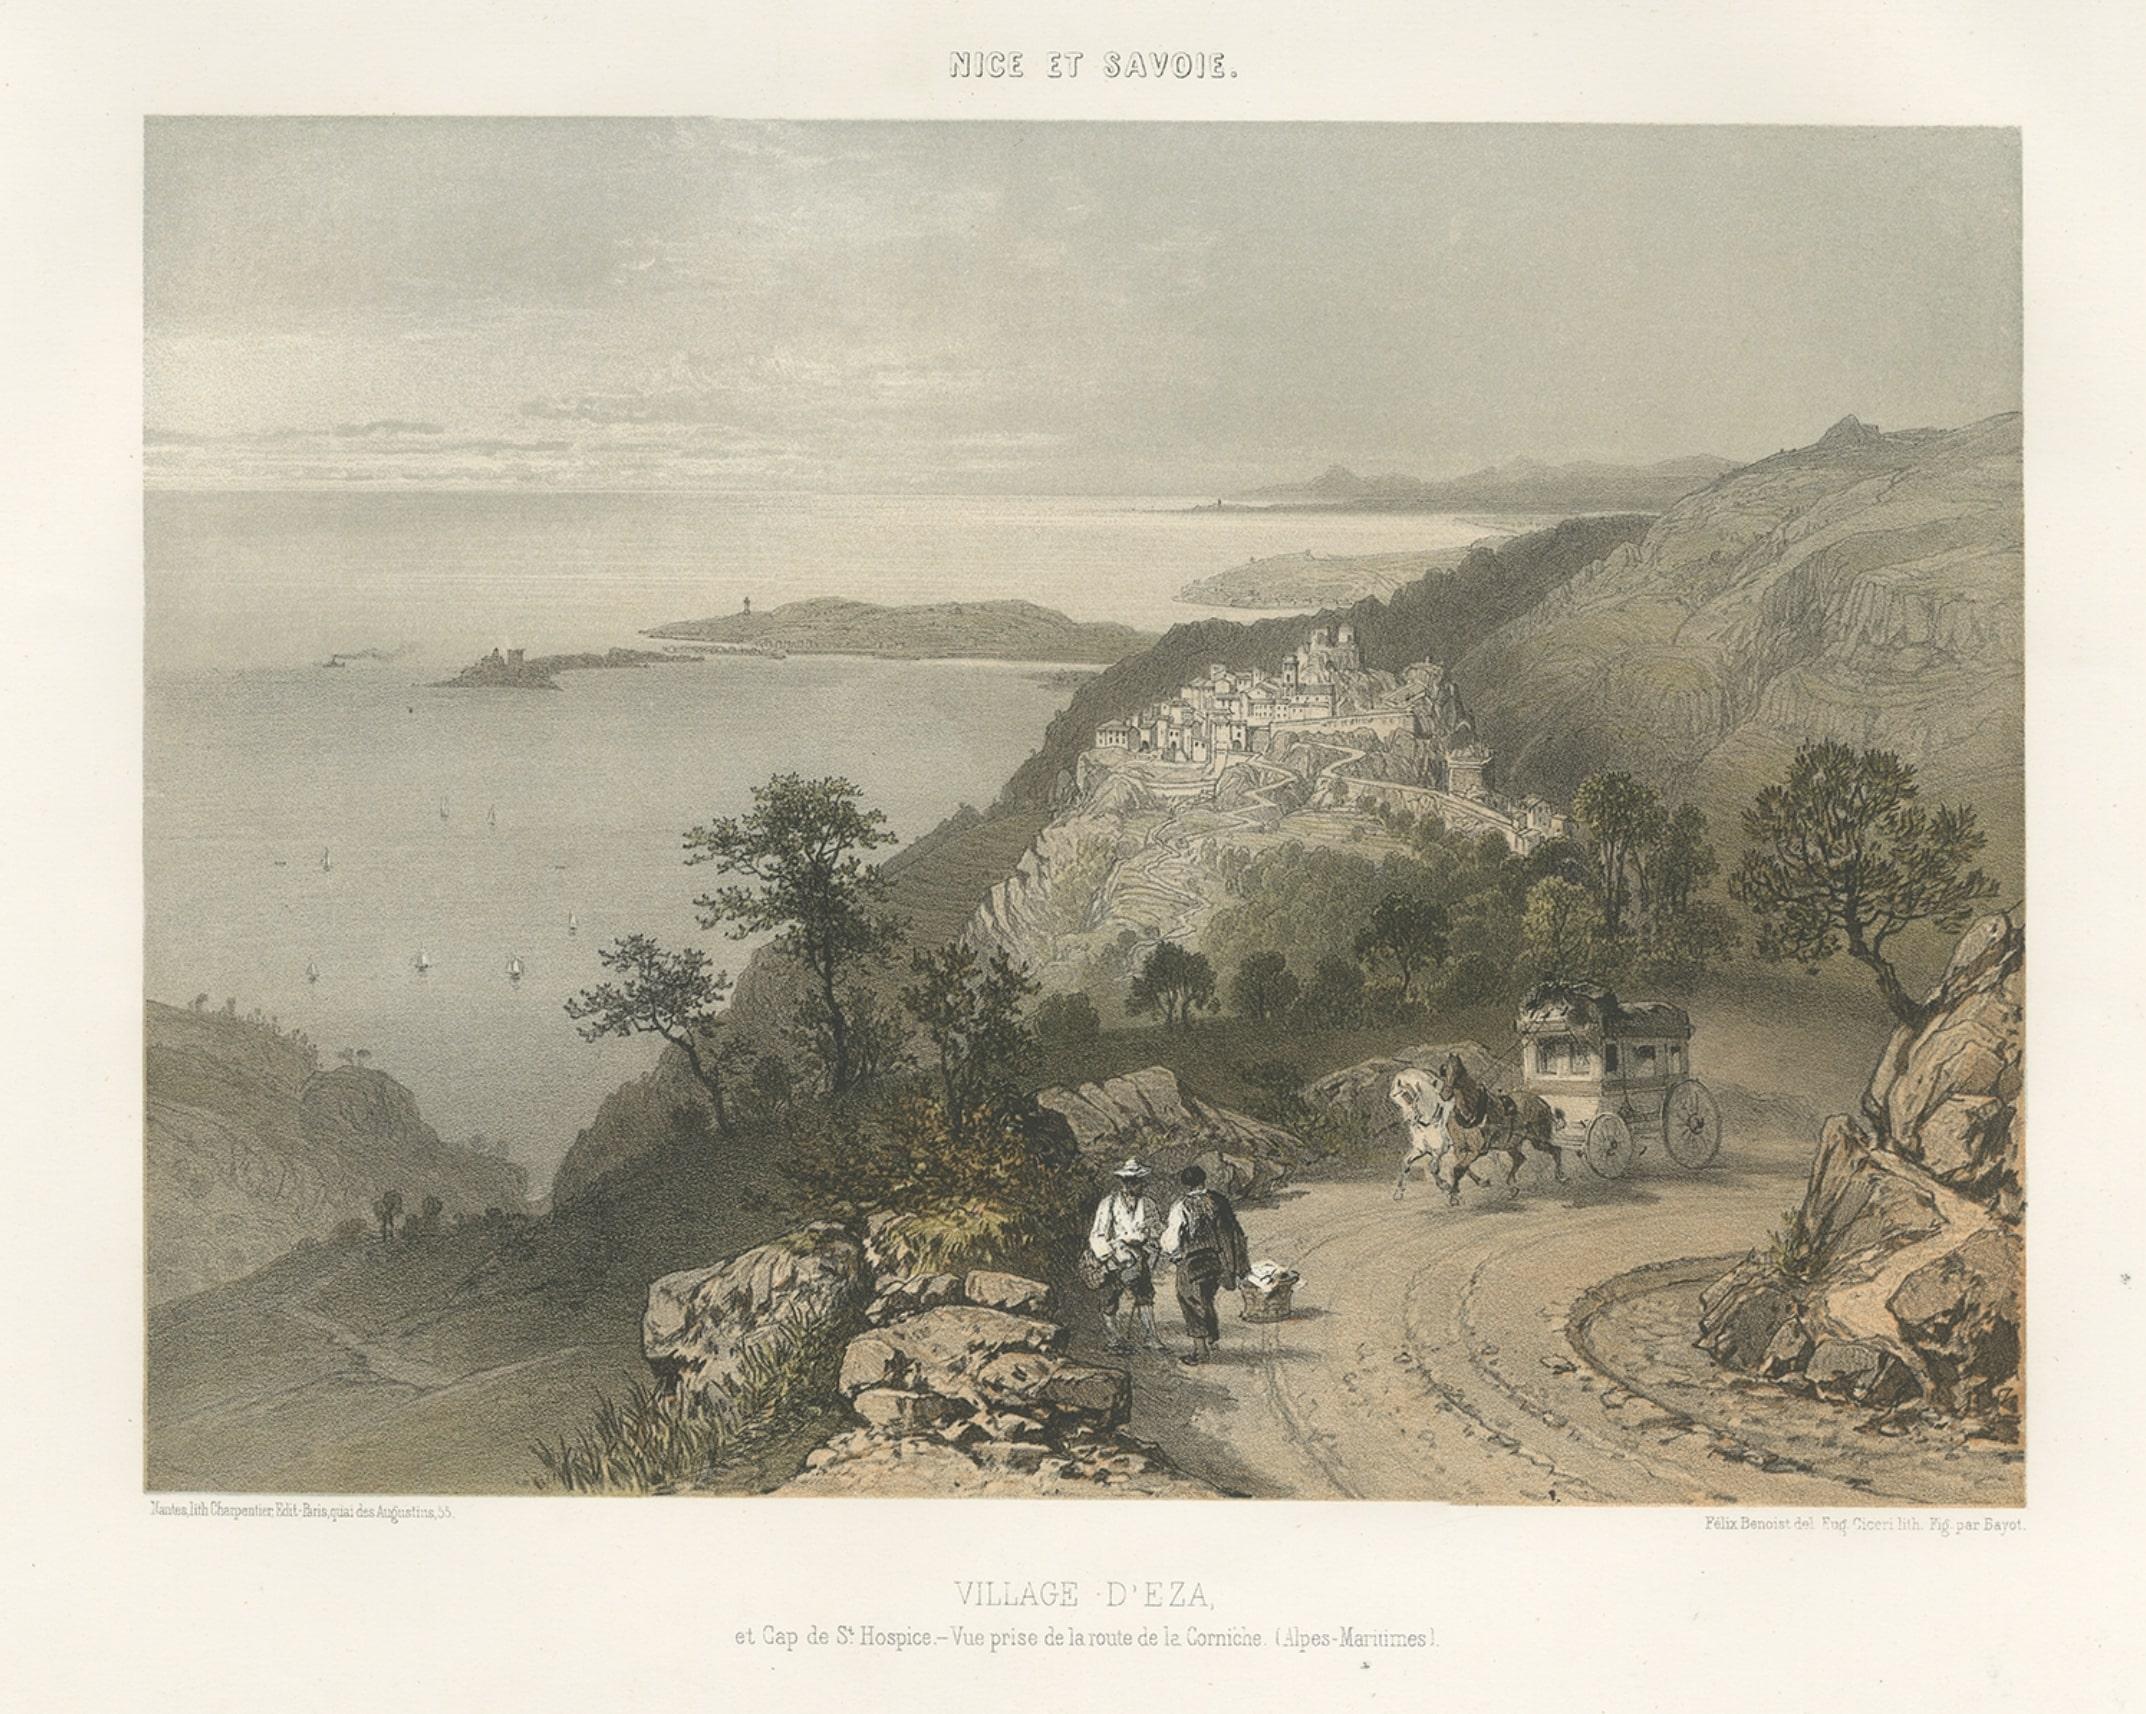 Paper Antique Print of Èze Village in The Nice and Savoy Regions of France, c.1865